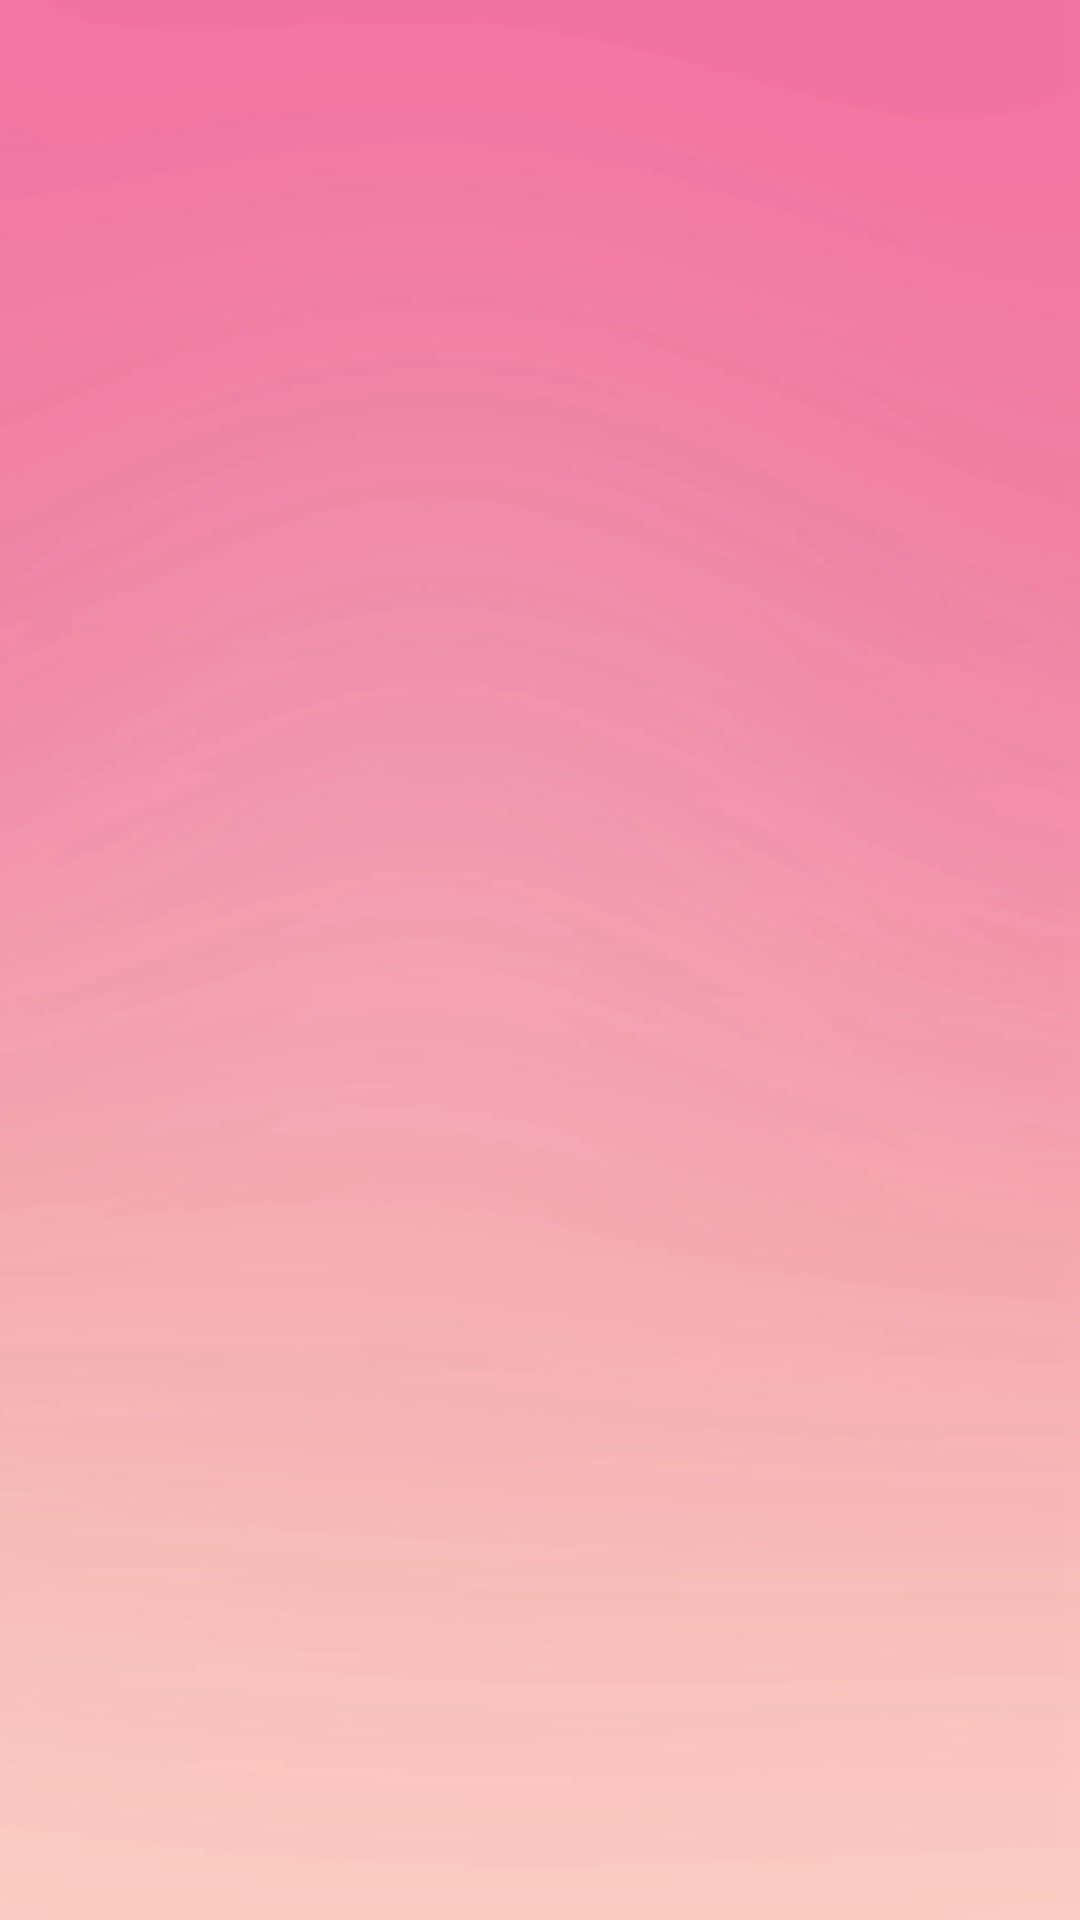 Capture the Beauty of Pink Aesthetic with an iPhone Wallpaper